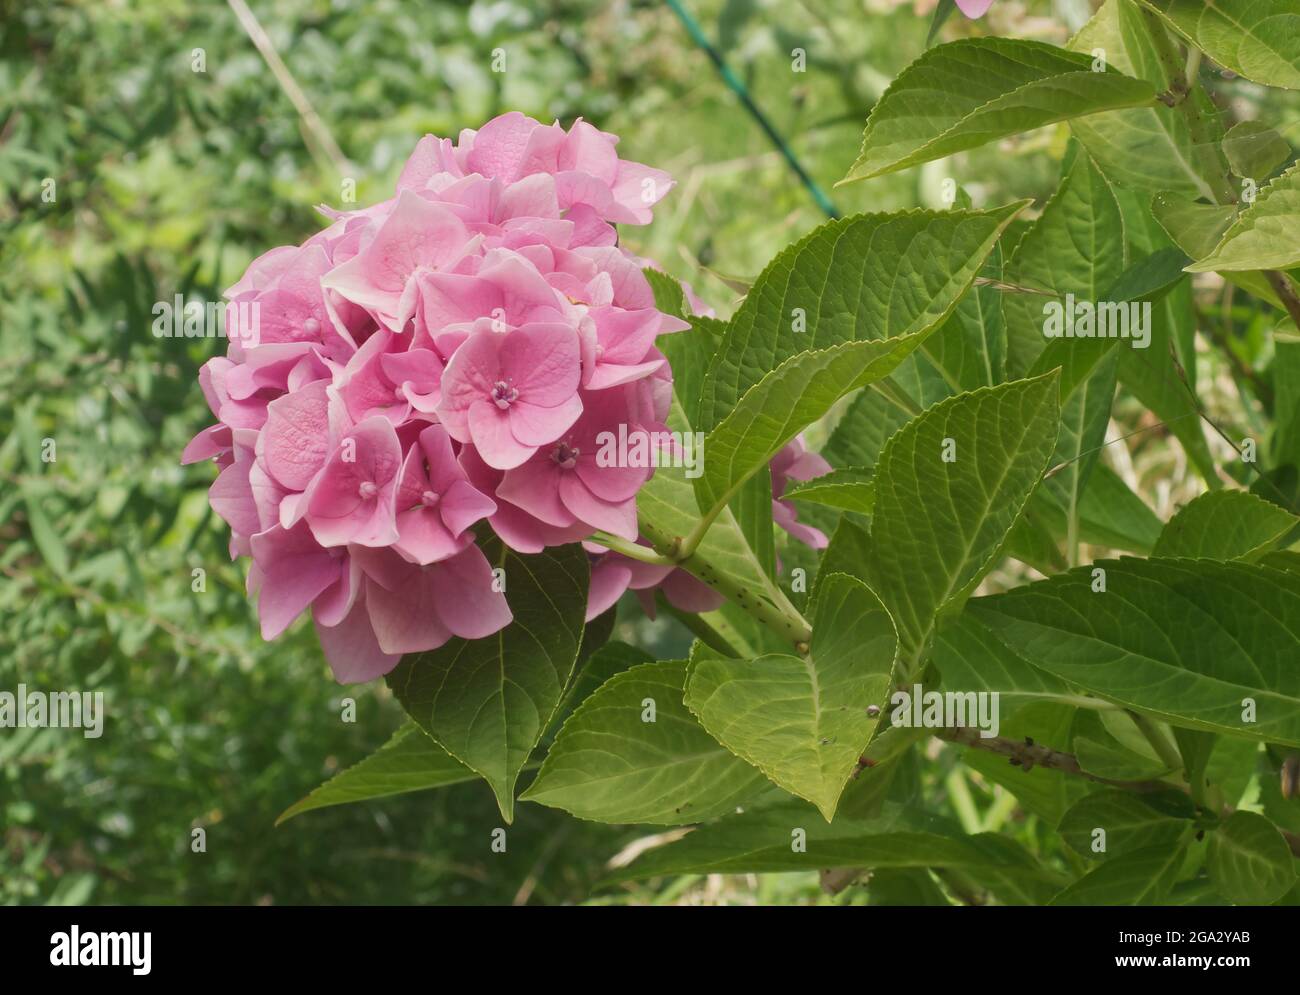 Hydrangea shrub with pink blossoms in the garden. Hydrangea is known also as hortensia. Stock Photo